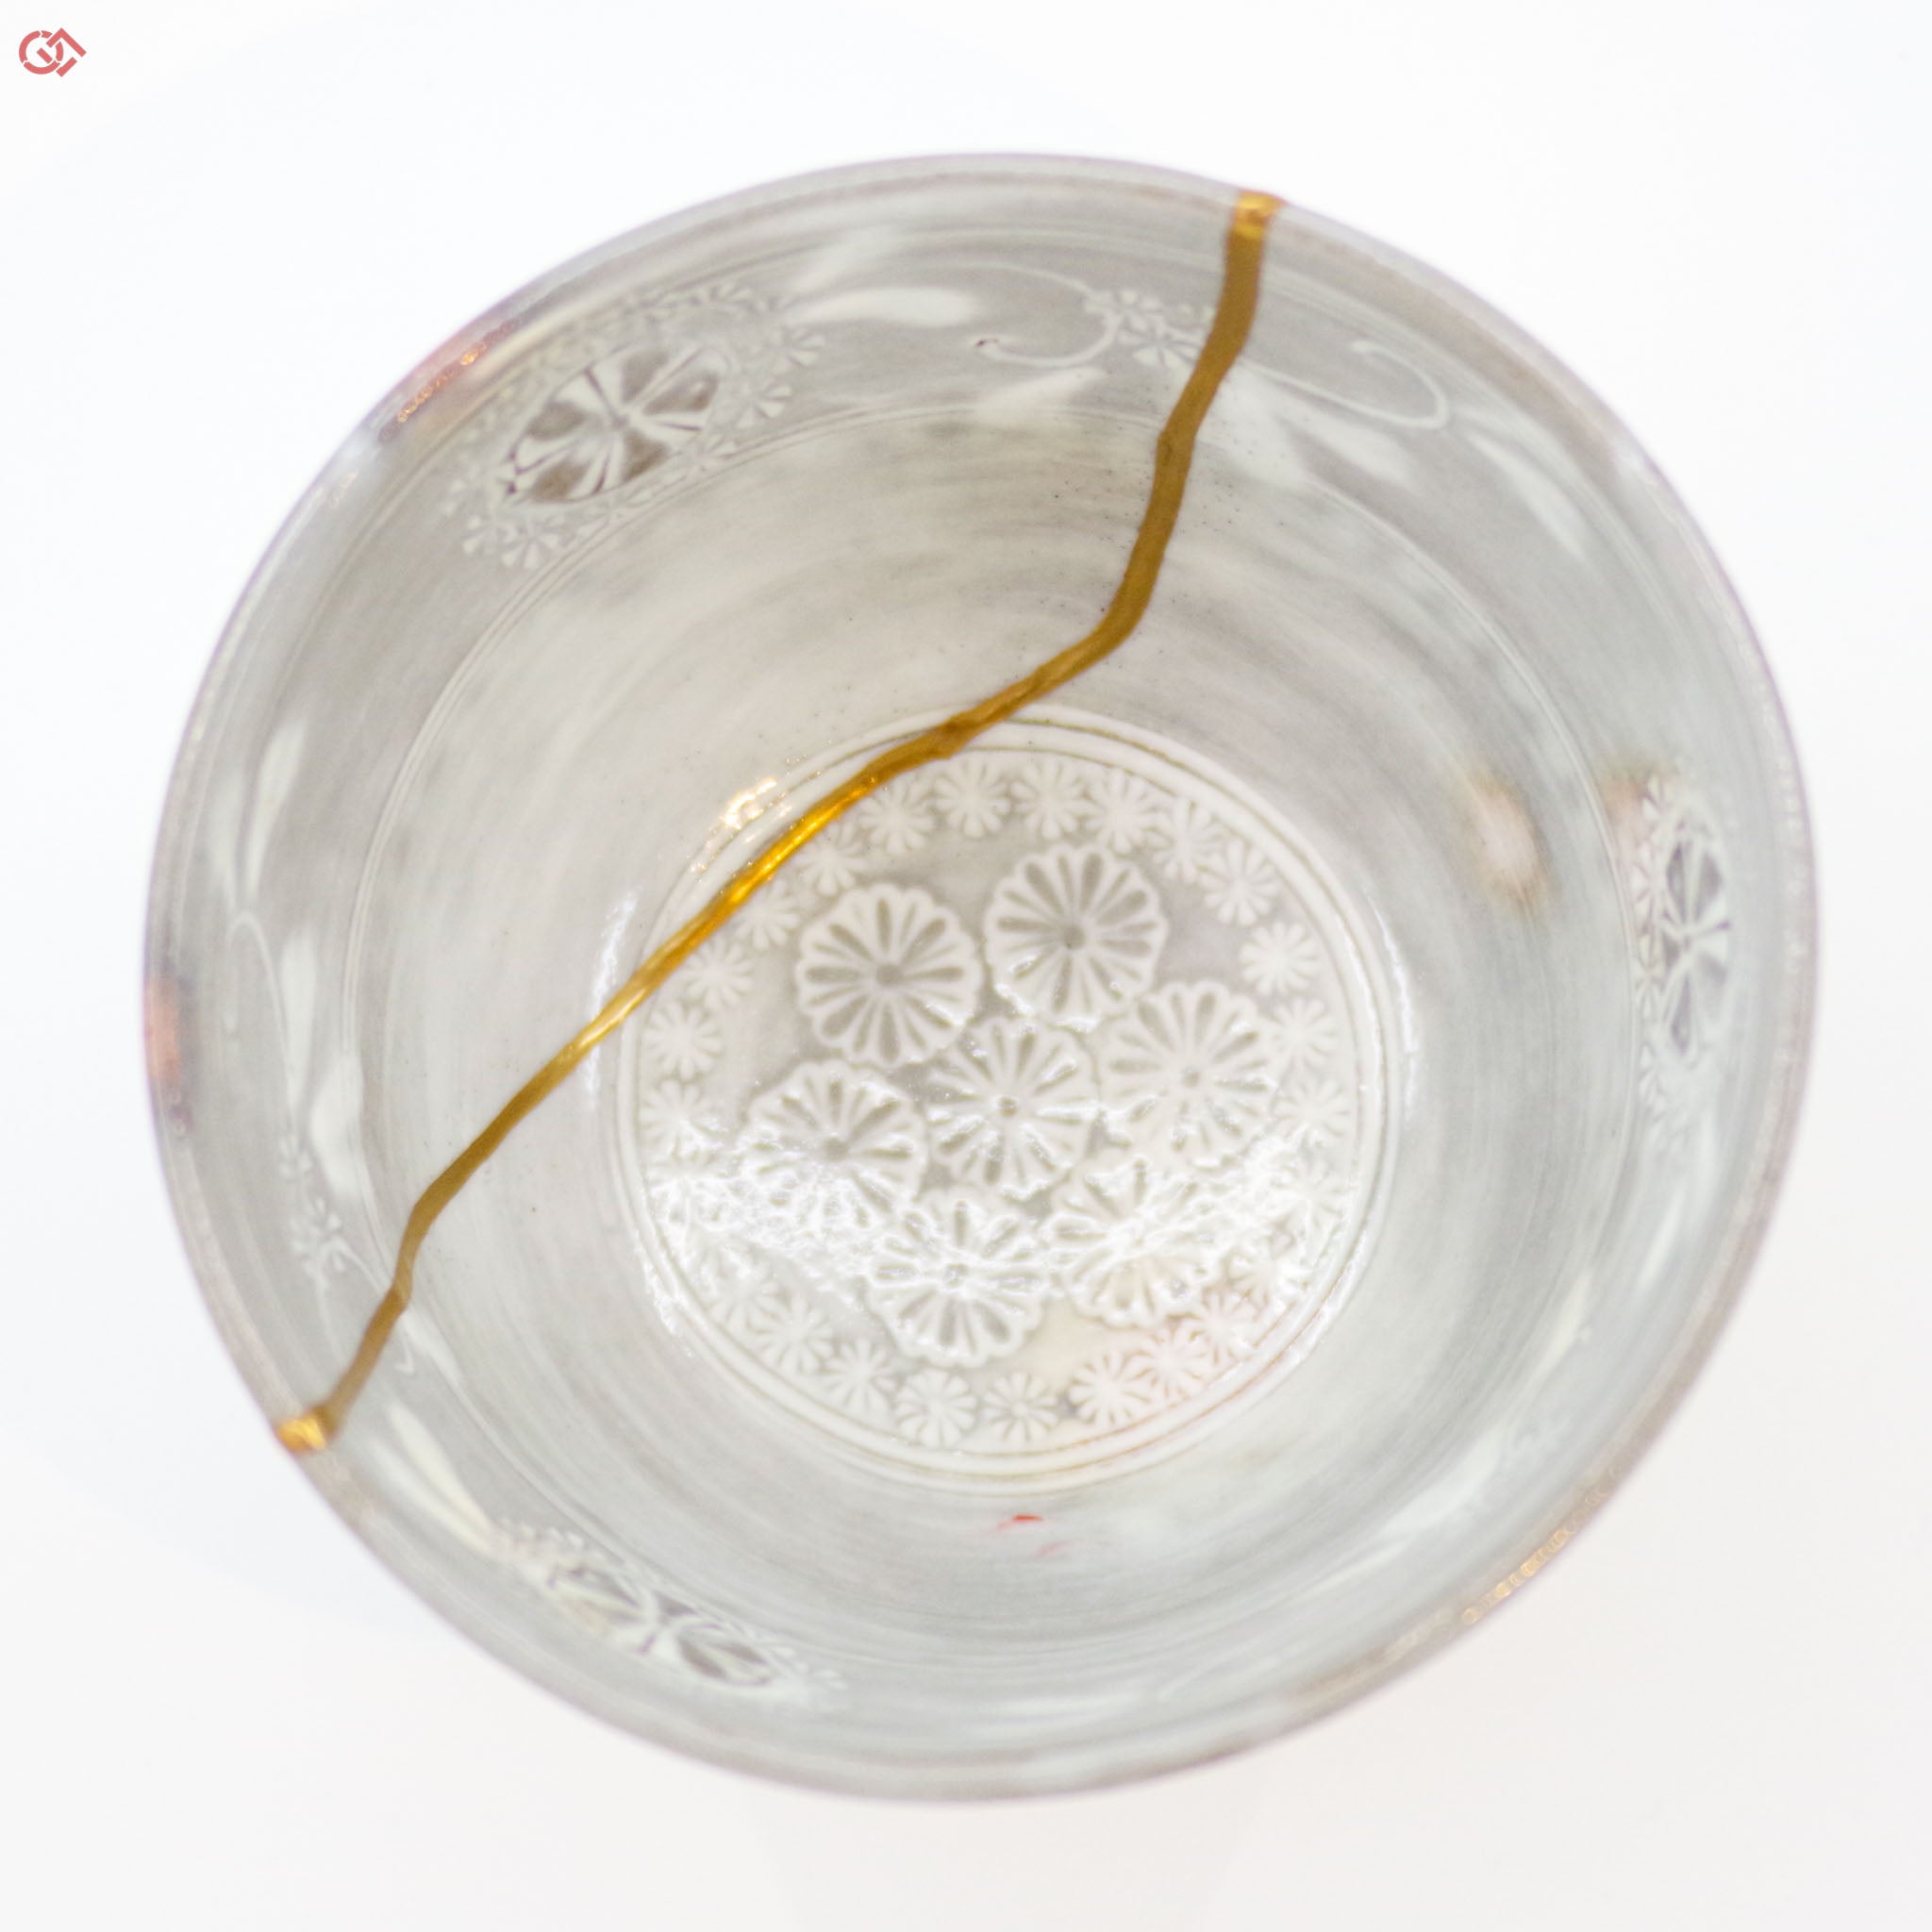 Image of Authentic Kintsugi pottery from above